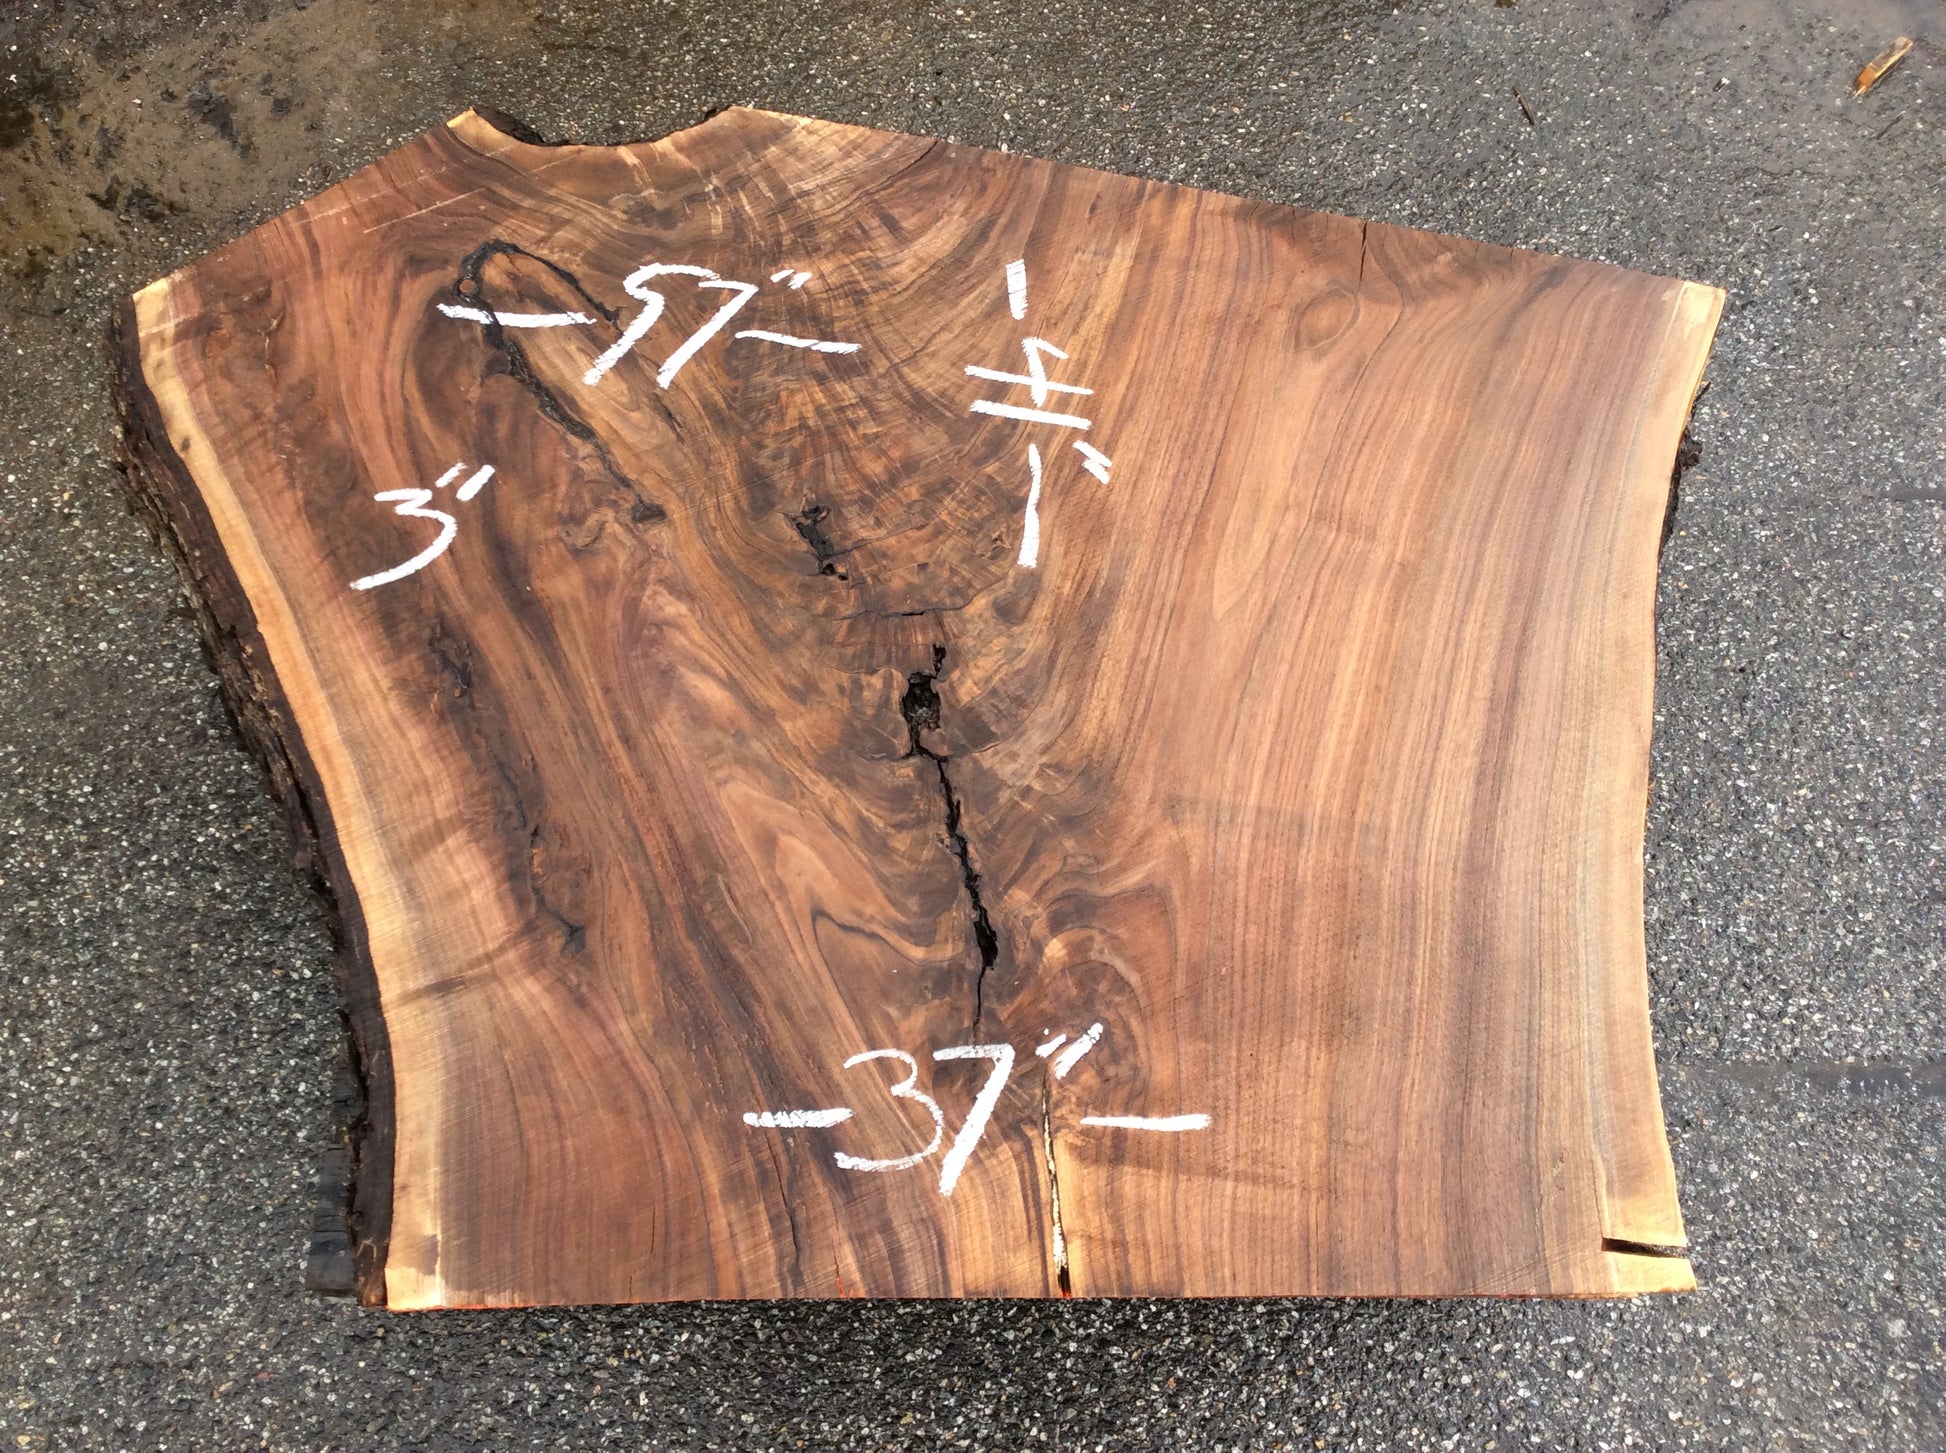 Claro Walnut, Crotch figure top to bottem inclusion in center